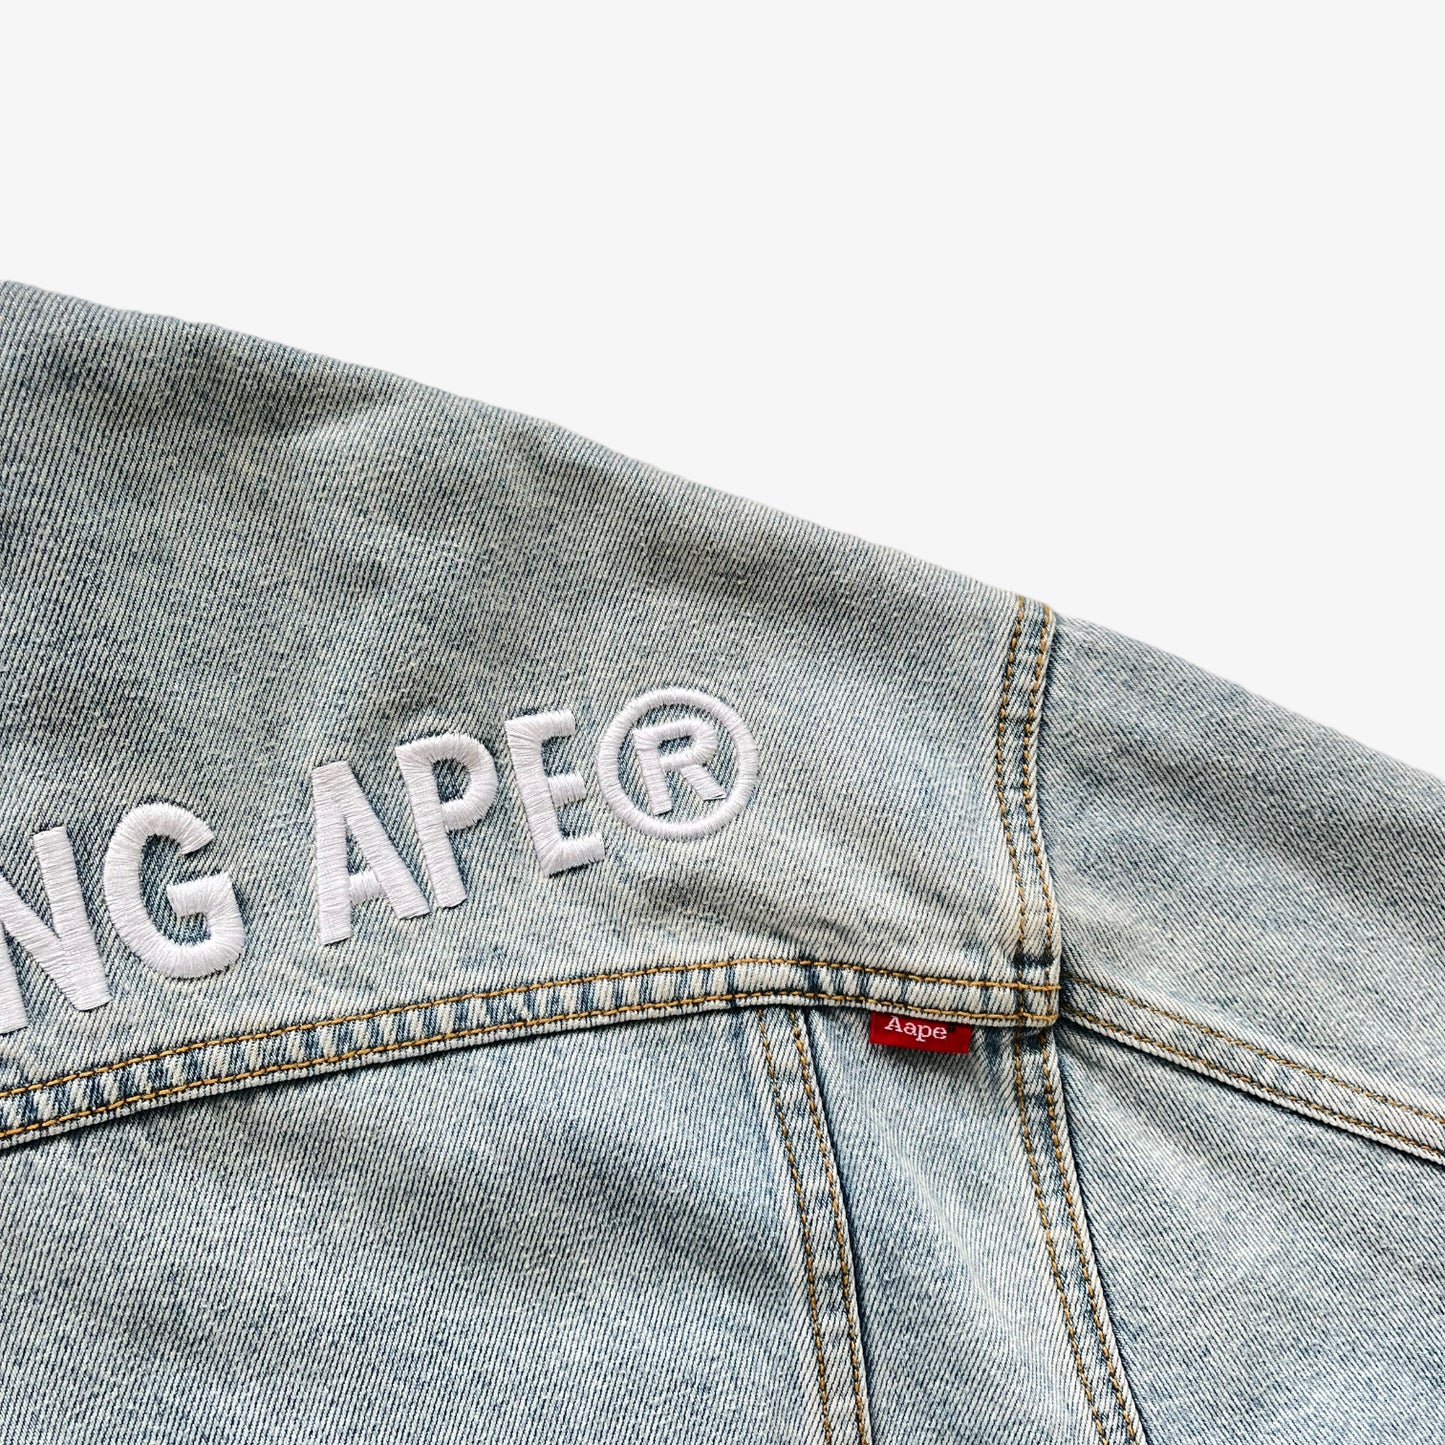 BAPE AAPE Denim Jacket With Removable Hoodie Back Tag - Casspios Dream